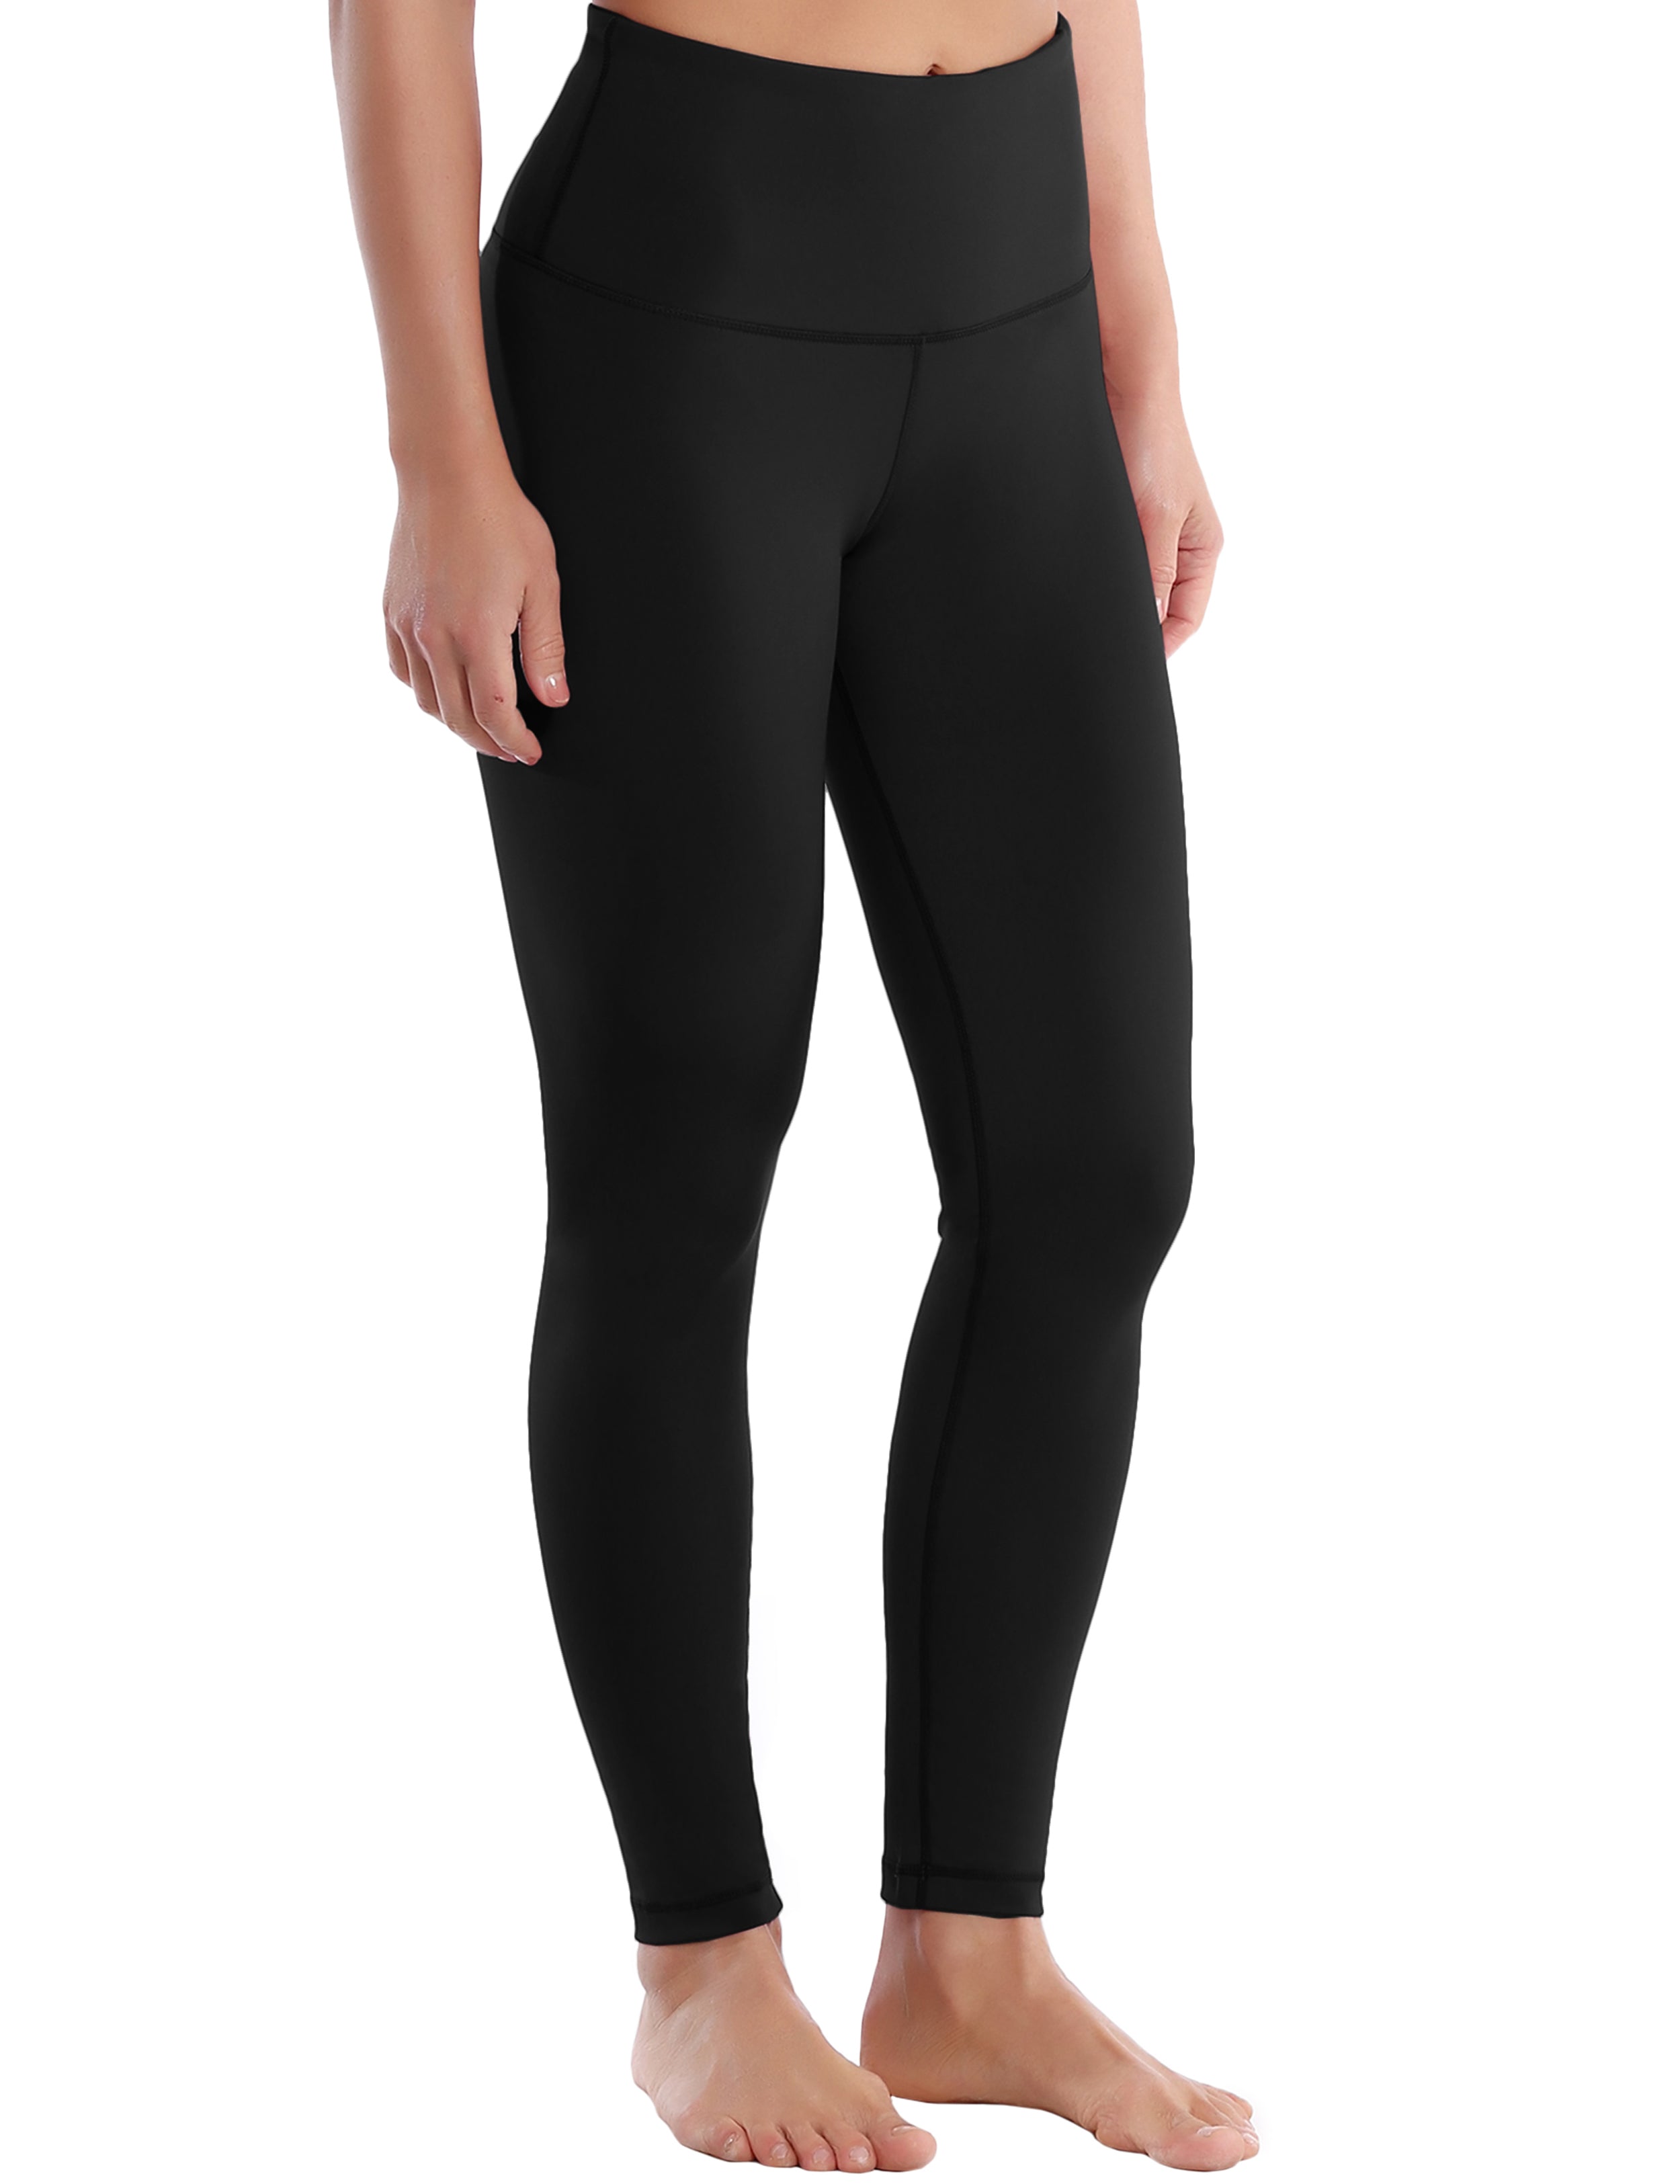 High Waist Pilates Pants black 75%Nylon/25%Spandex Fabric doesn't attract lint easily 4-way stretch No see-through Moisture-wicking Tummy control Inner pocket Four lengths